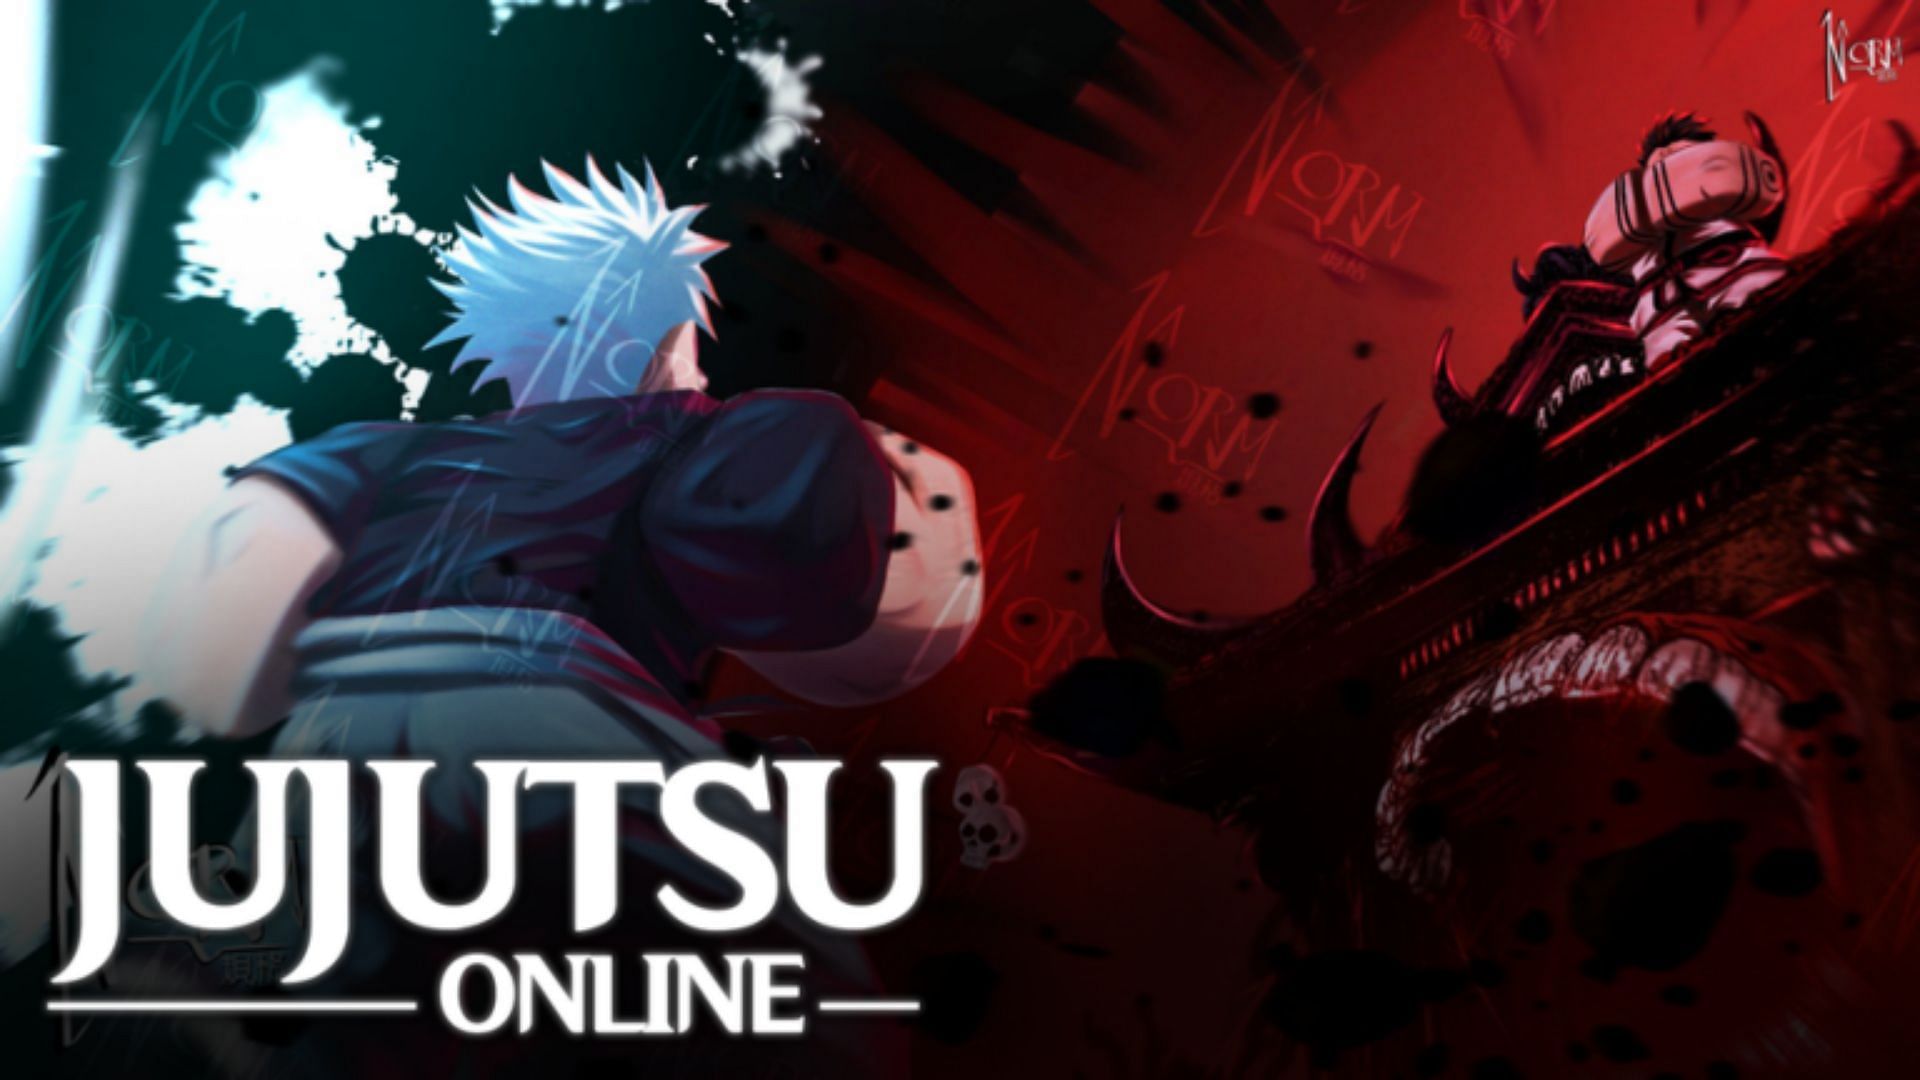 Codes for Jujutsu Online and their importance (Image via Roblox)